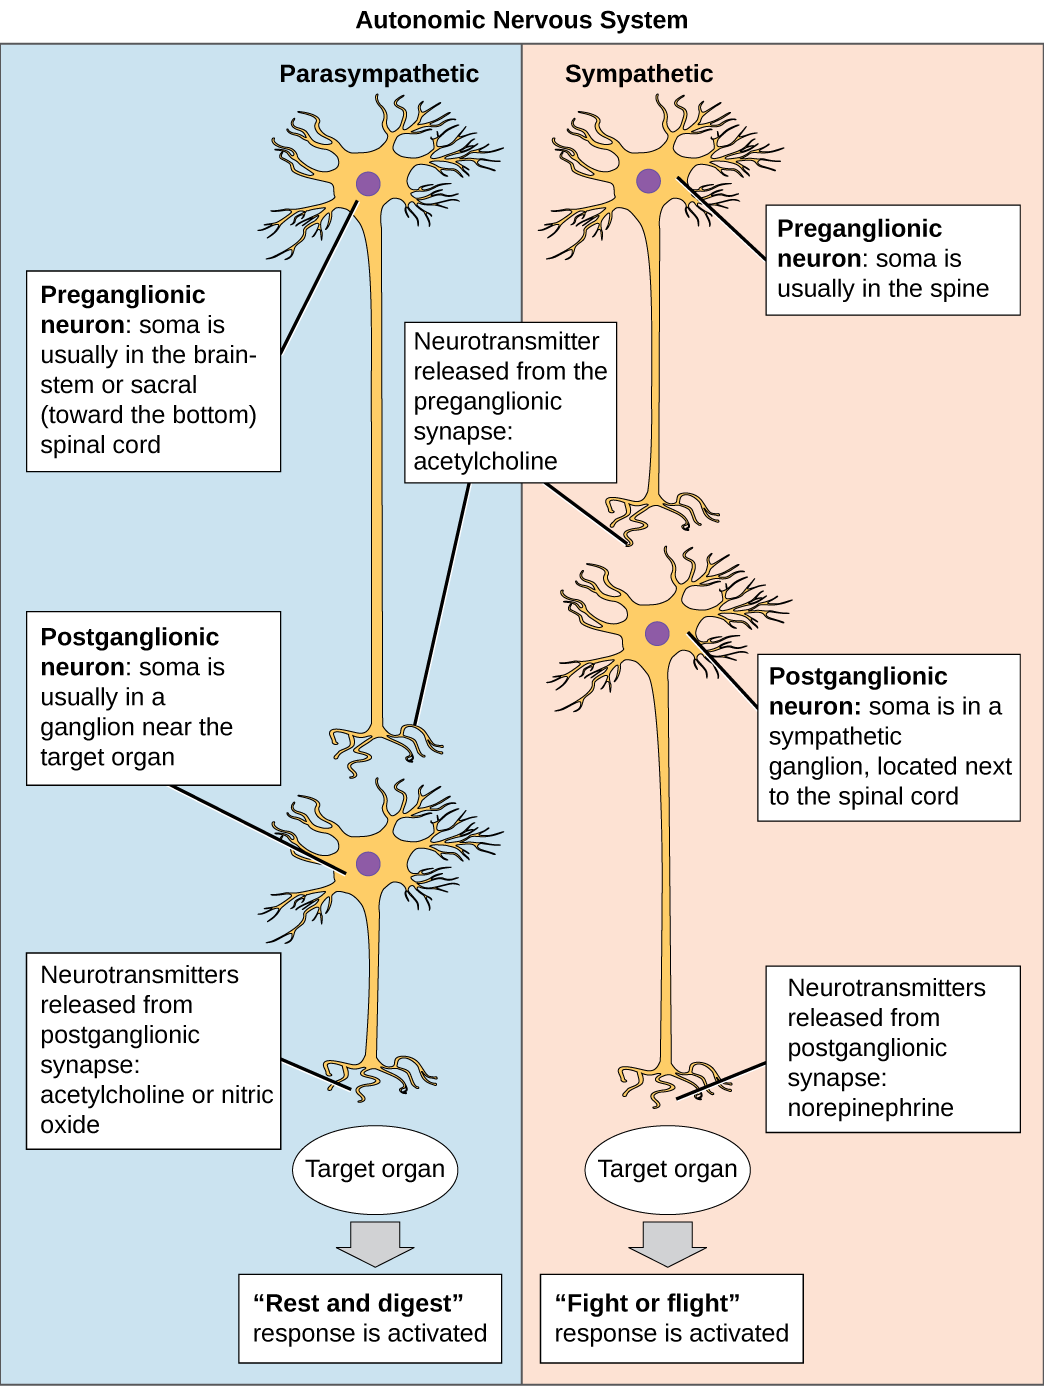 The autonomic nervous system is divided into sympathetic and parasympathetic systems. In the sympathetic system, the soma of the preganglionic neurons is usually located in the spine while in the parasympathetic system the soma is usually in the brainstem or sacral, at the bottom of the spine. In both systems, the preganglionic neuron releases the neurotransmitter acetylcholine into the synapse. Postganglionic neurons of the sympathetic system have somas in a sympathetic ganglion, located next to the spinal cord. Postganglionic neurons of the parasympathetic system have somas in ganglions near the target organ. Postganglionic neurons of the sympathetic system release norepinephrine into the synapse, while postganglionic neurons of the parasympathetic system release acetylcholine or nitric oxide.